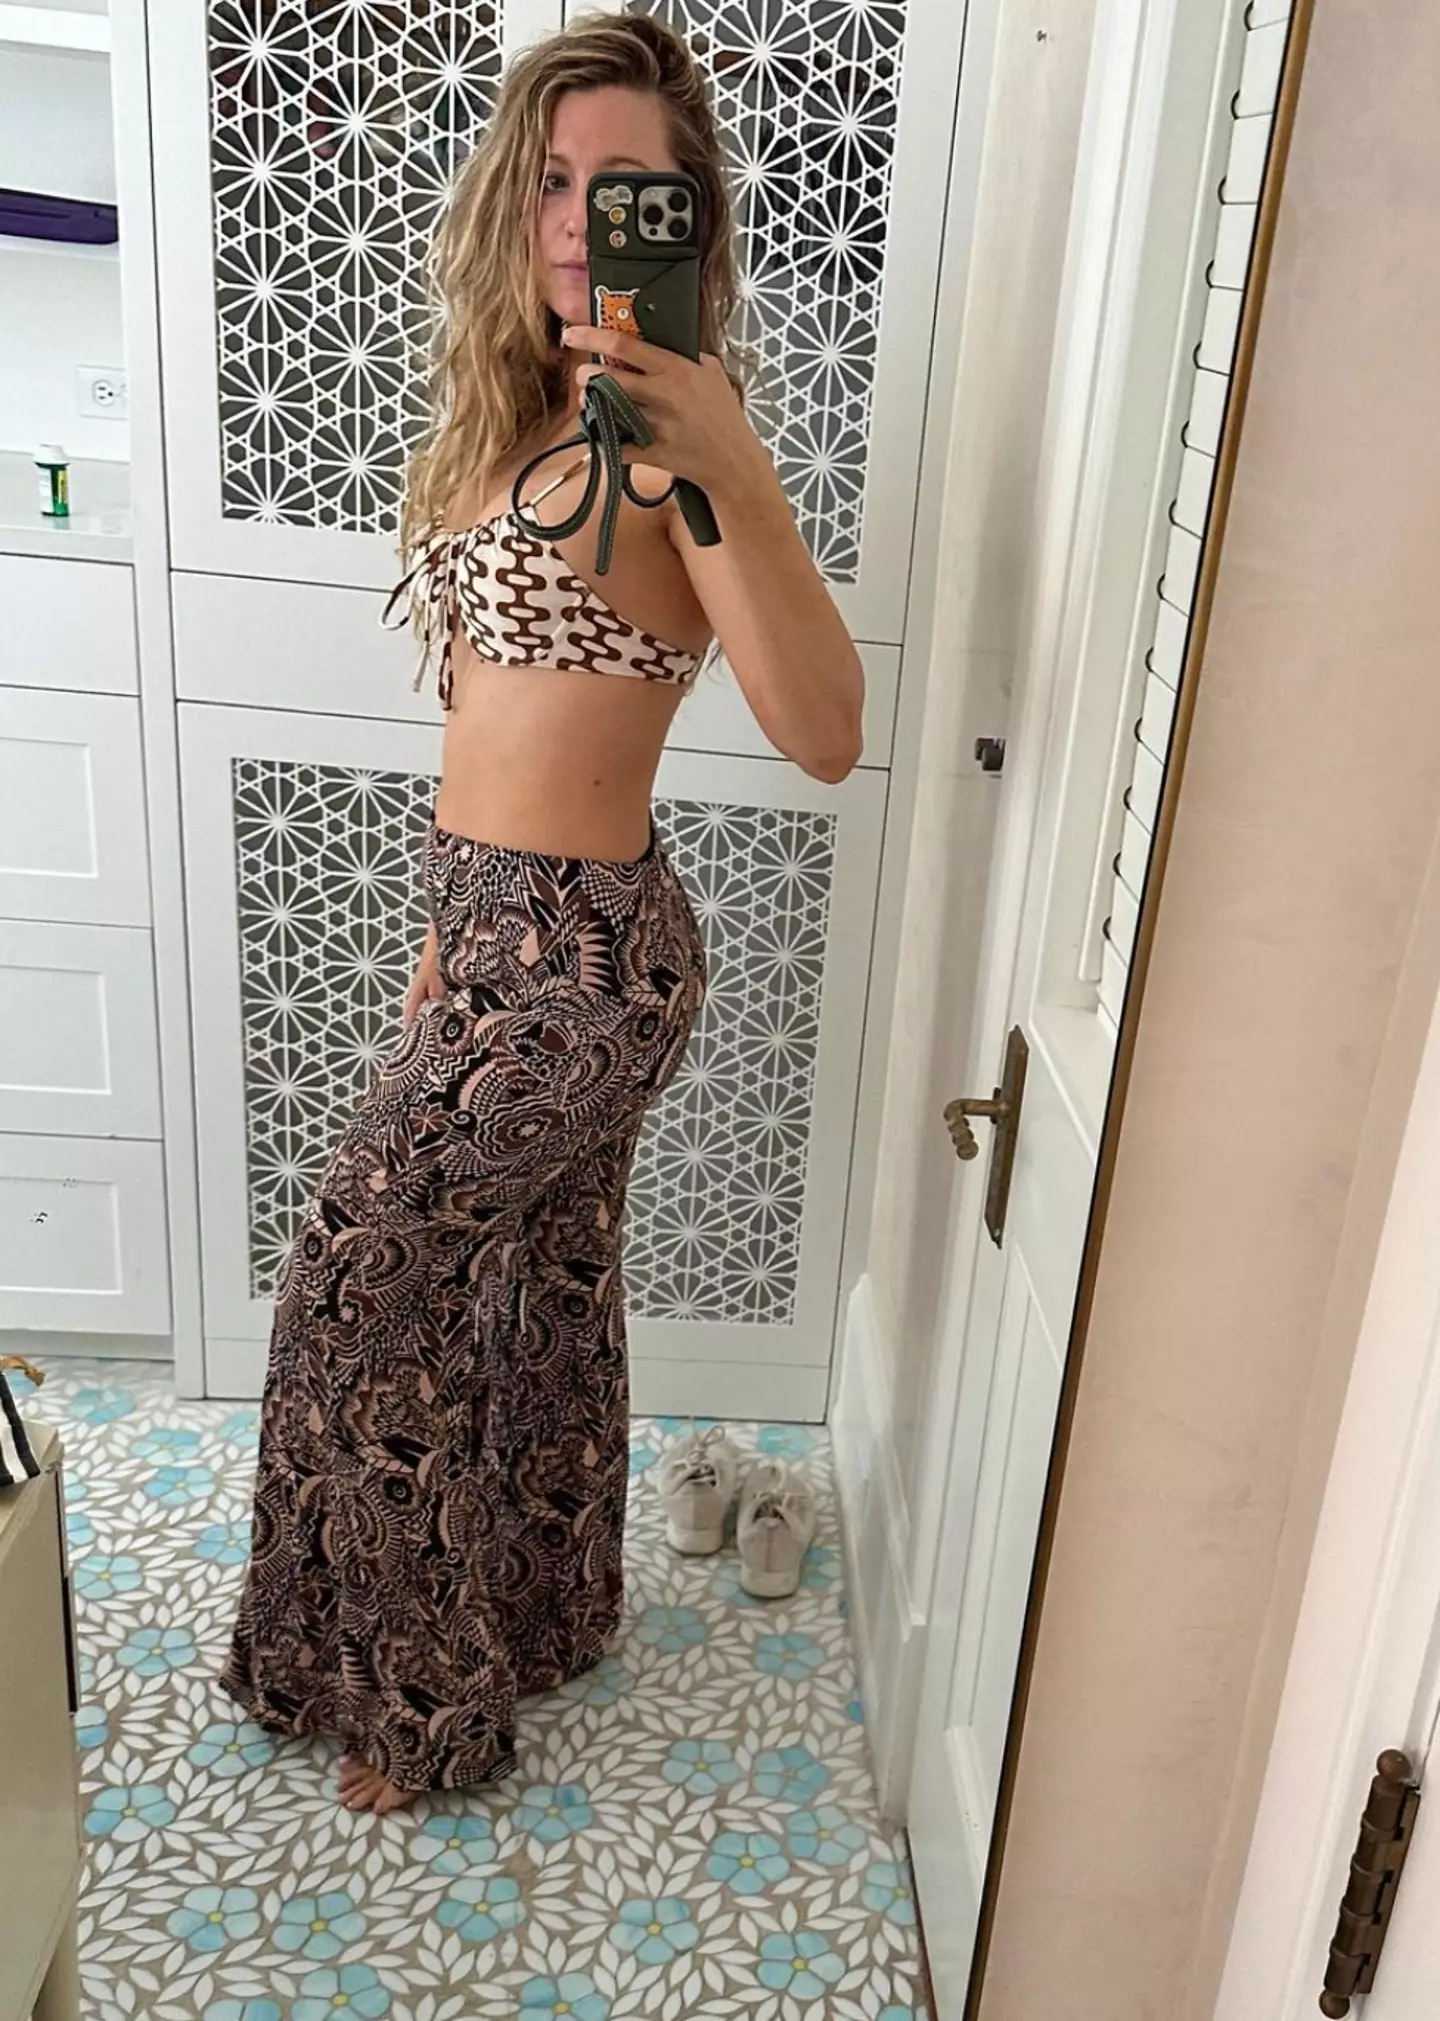 Blake Lively shared post-pregnancy pictures on Instagram.